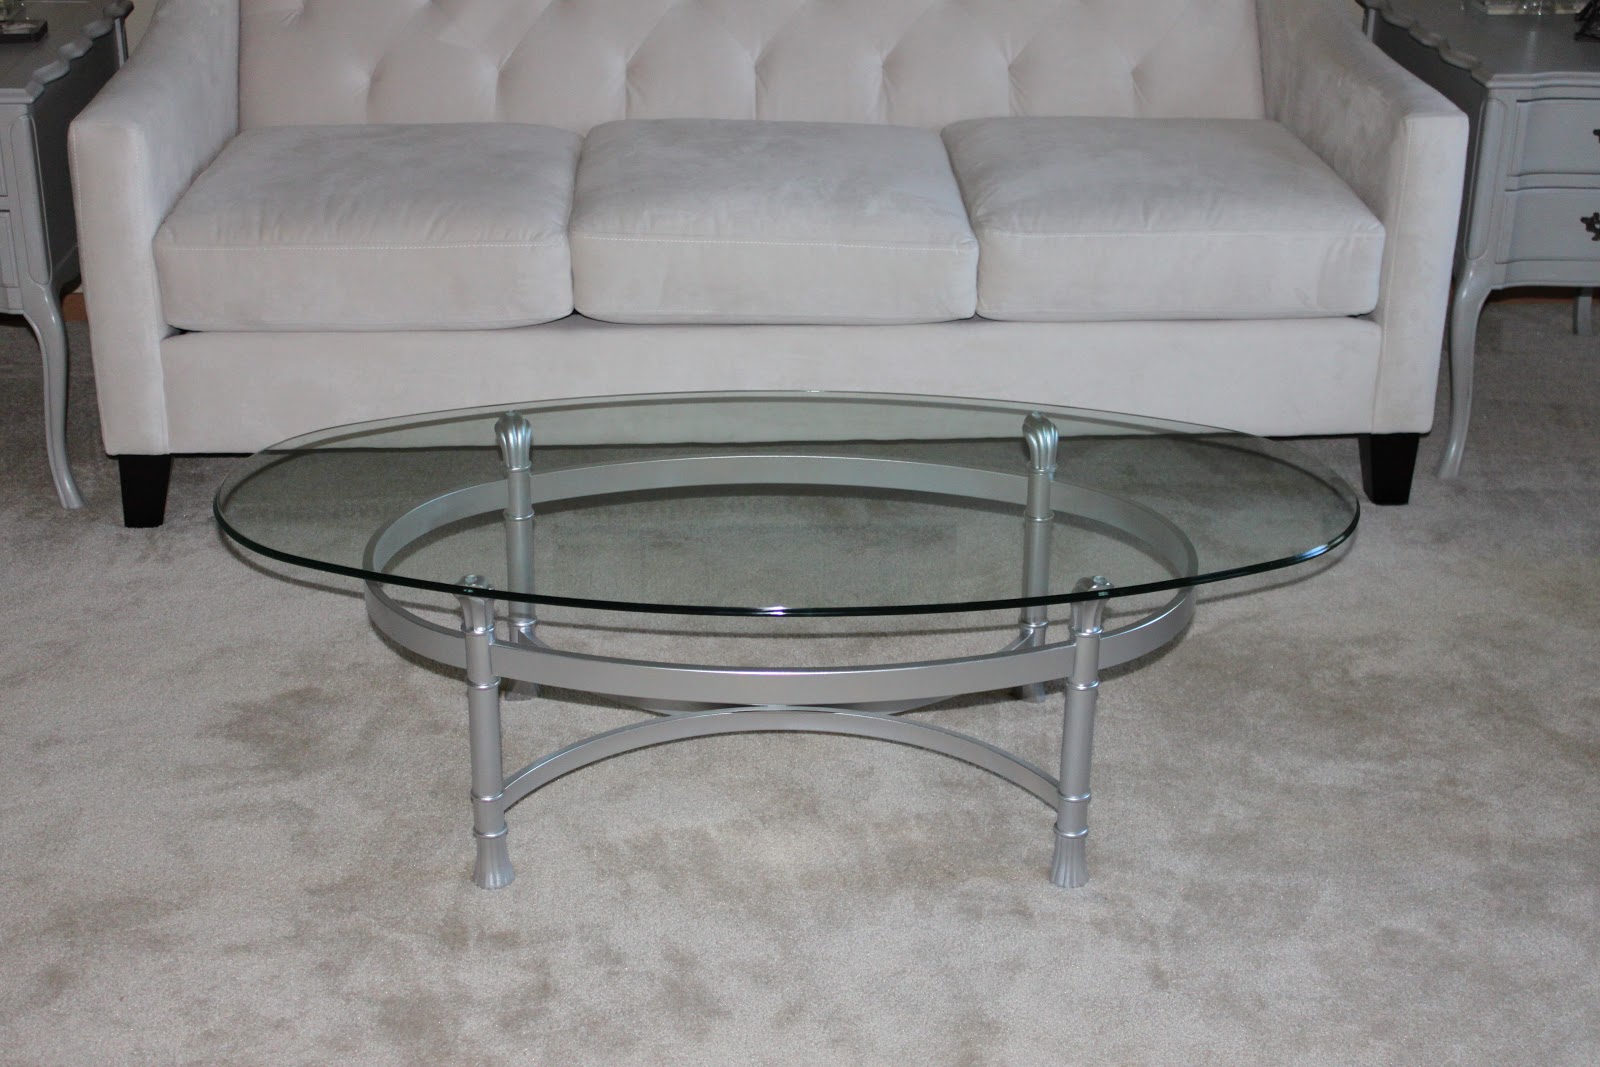 Diy Glass Top Coffee Tables Diy: coffee table makeover at